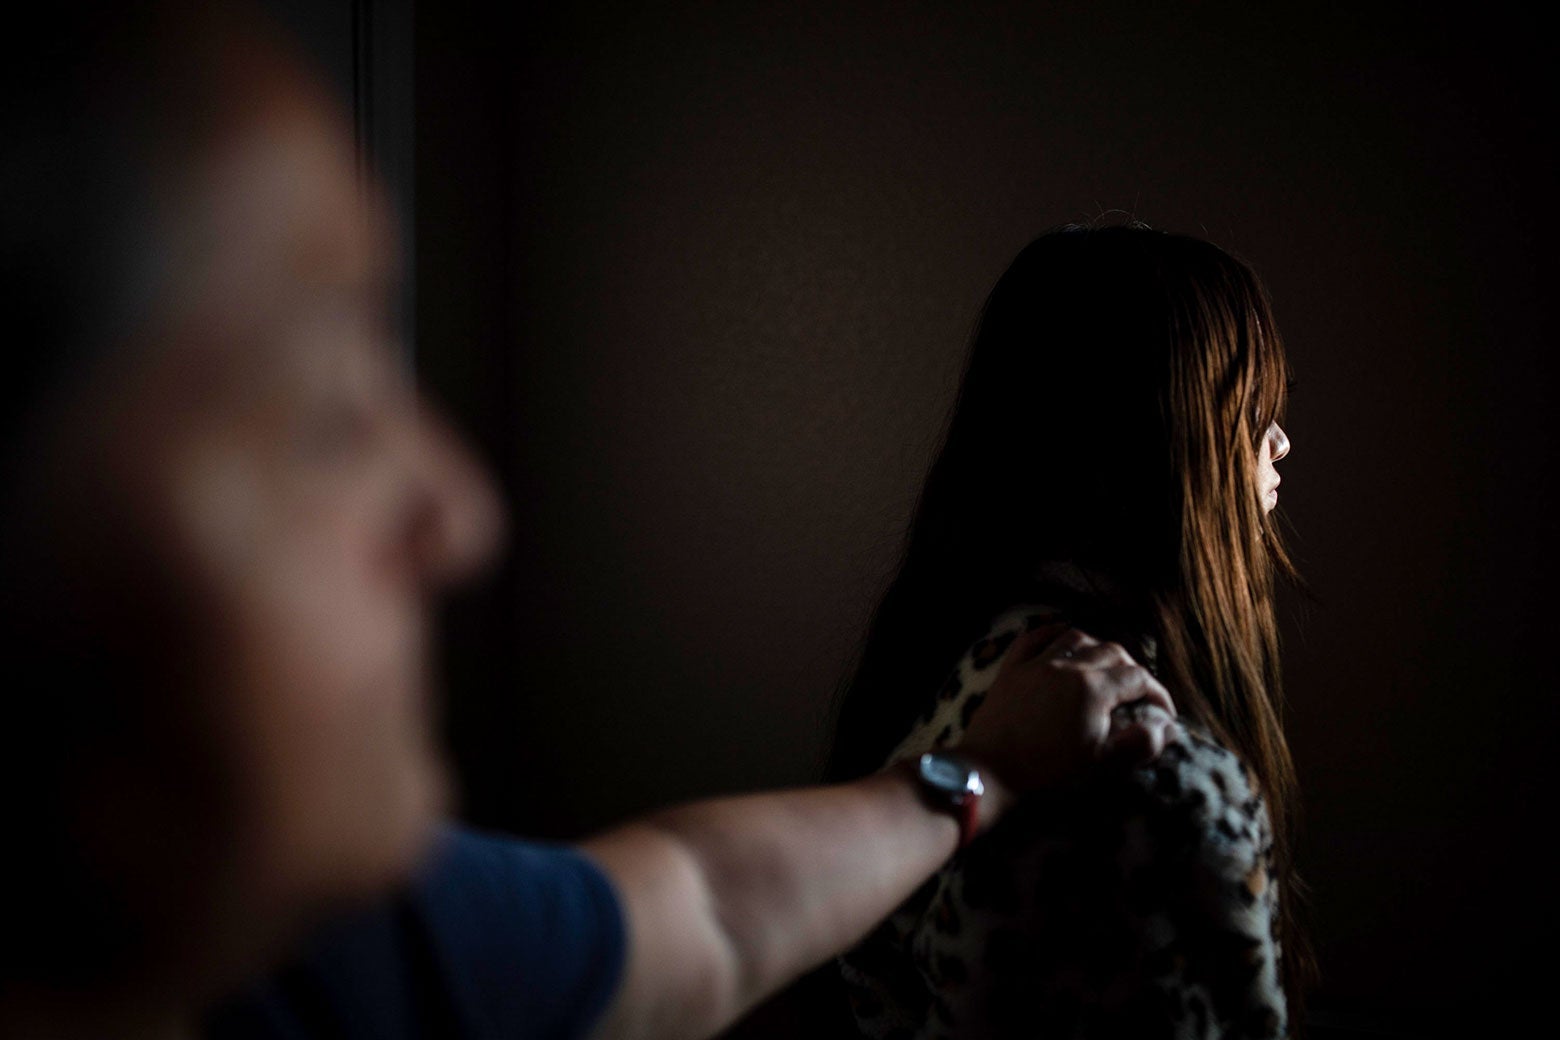 One Navajo girls story shows Americas failure to screen for sex trafficking. picture image